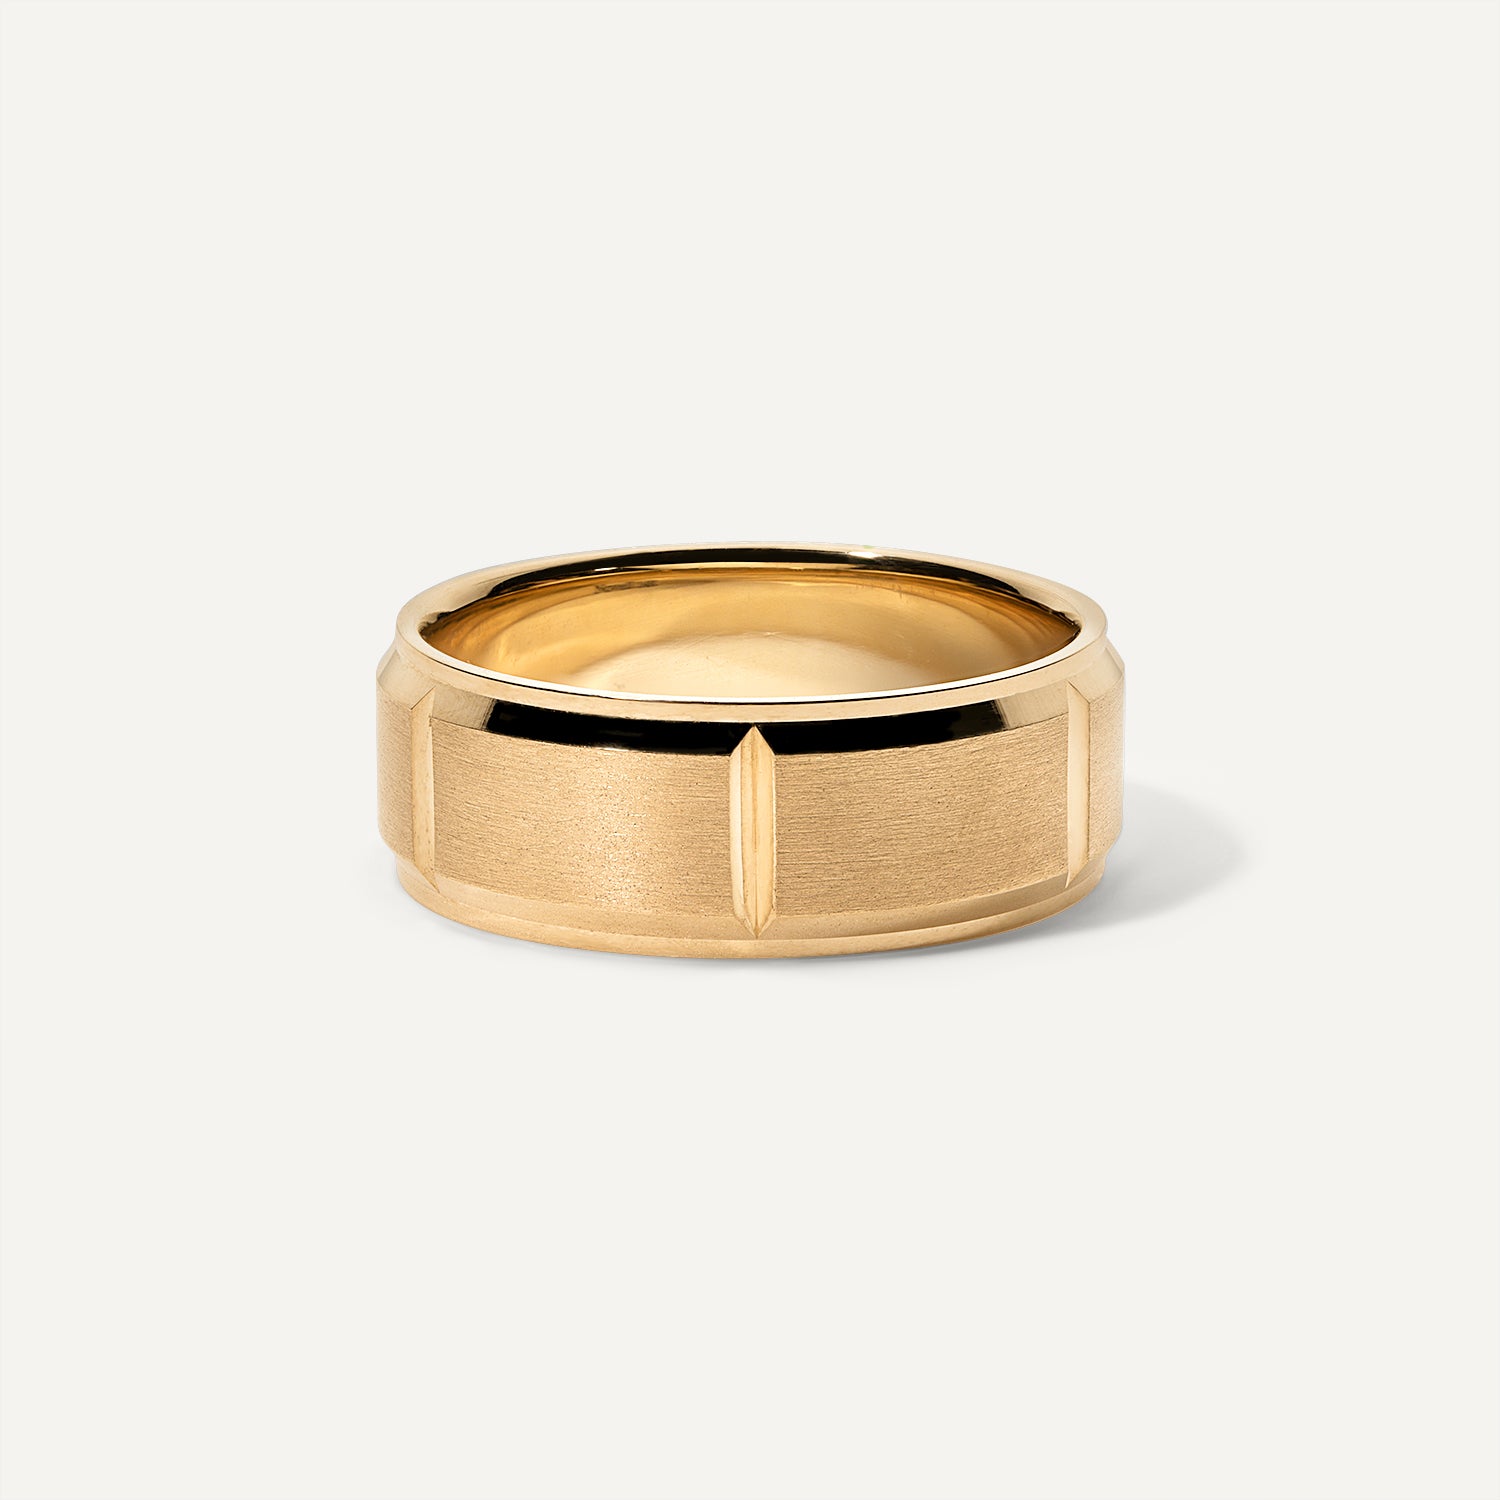 8mm Notched Men's Band- 14k Yellow Gold